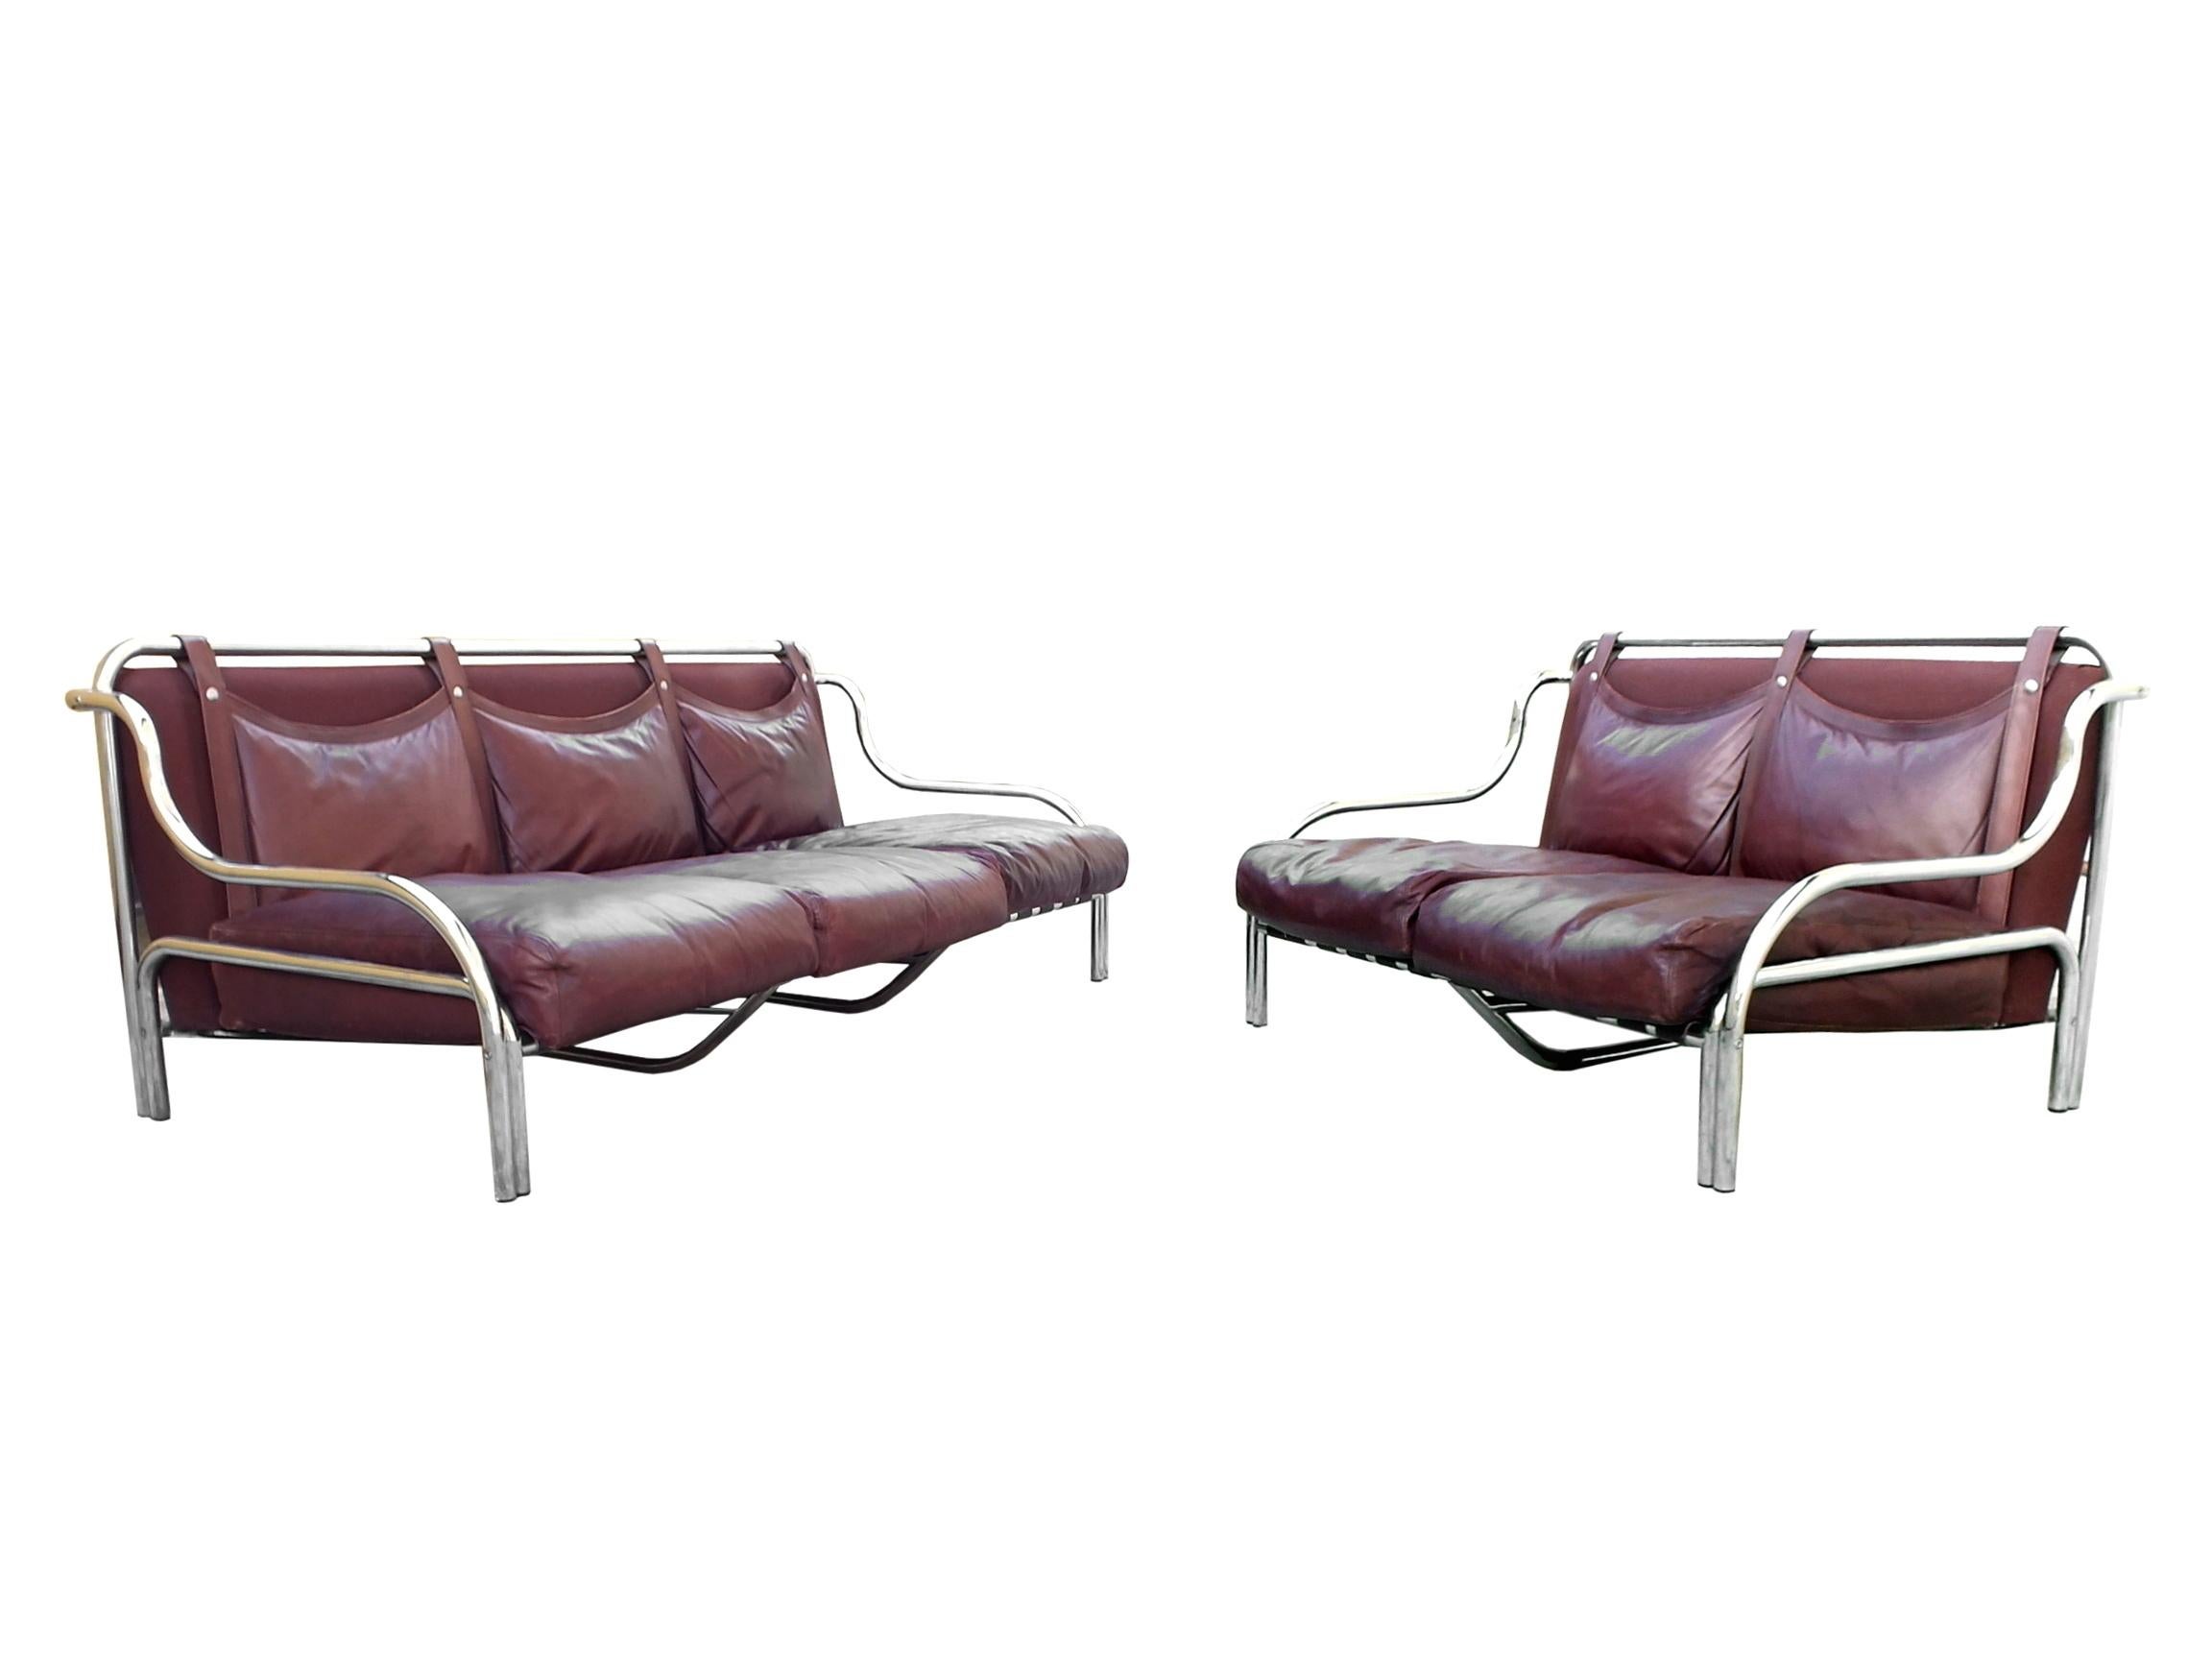 Leather Pair of Vintage Sofas by Gae Aulenti Production Poltronova, Italy, 1965 For Sale